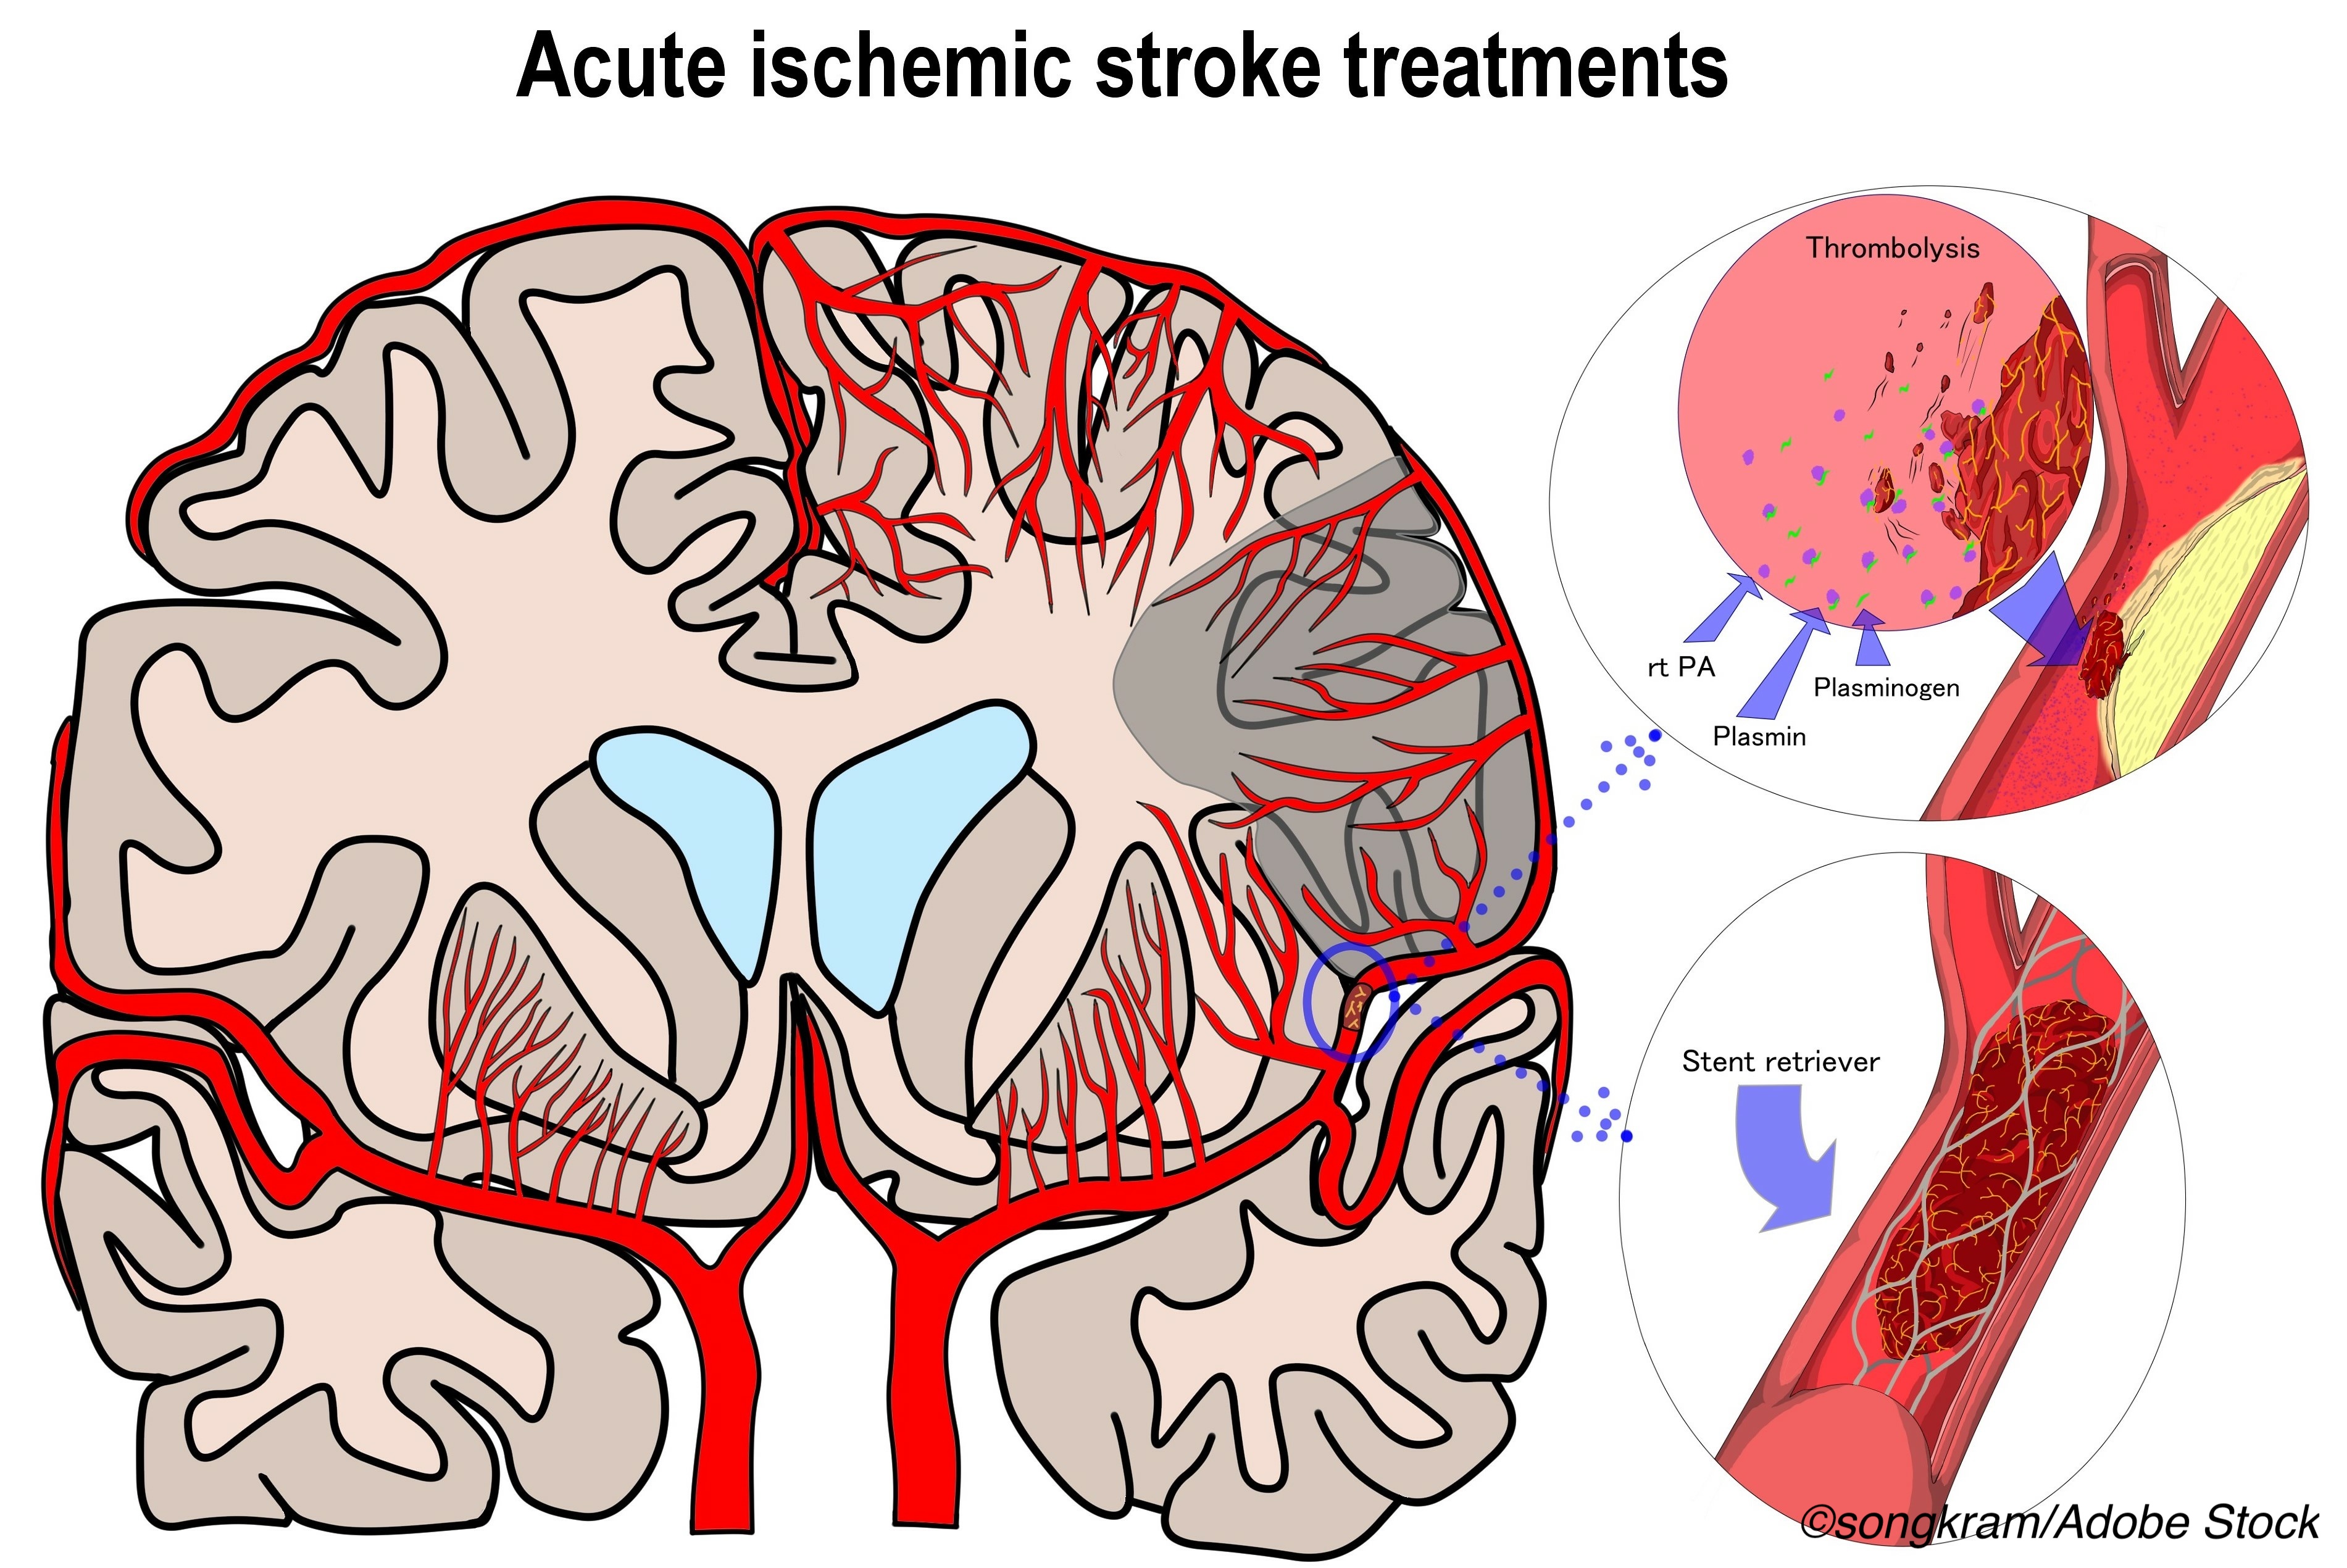 Thrombectomy Benefits Seen in Stroke Patients For Up to 24 Hours